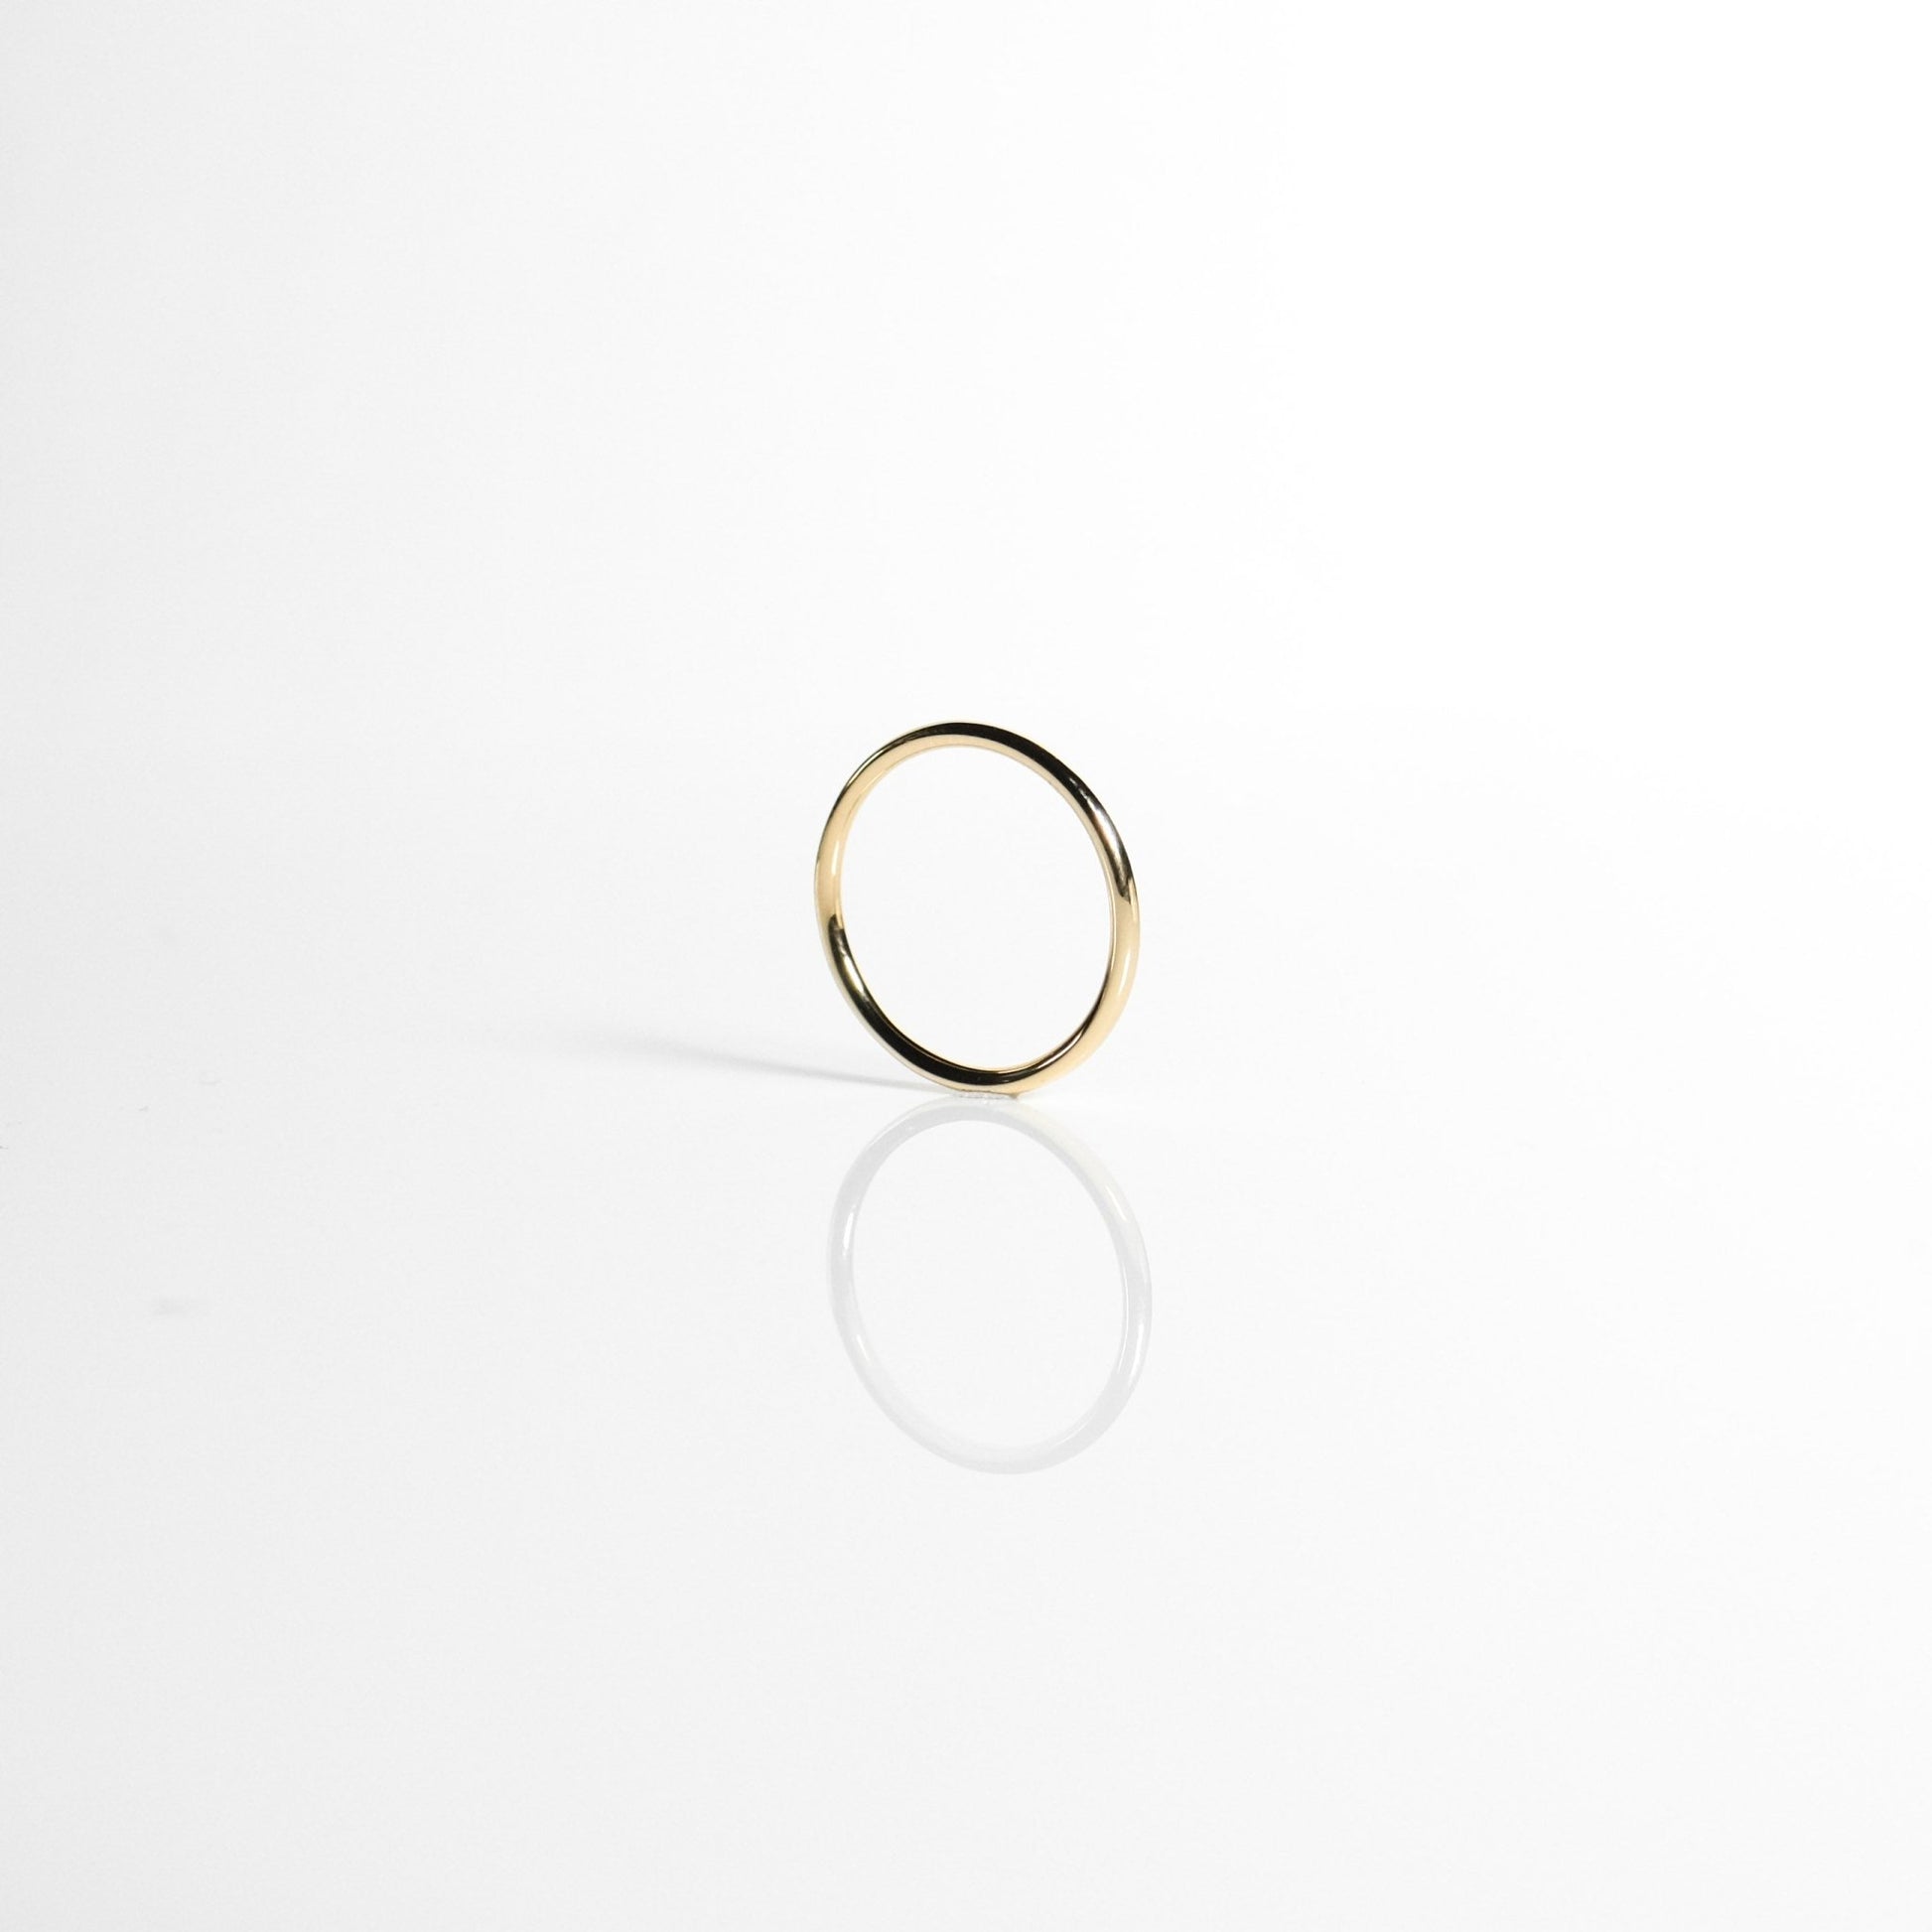 18k Solid Gold Ring - aucentic